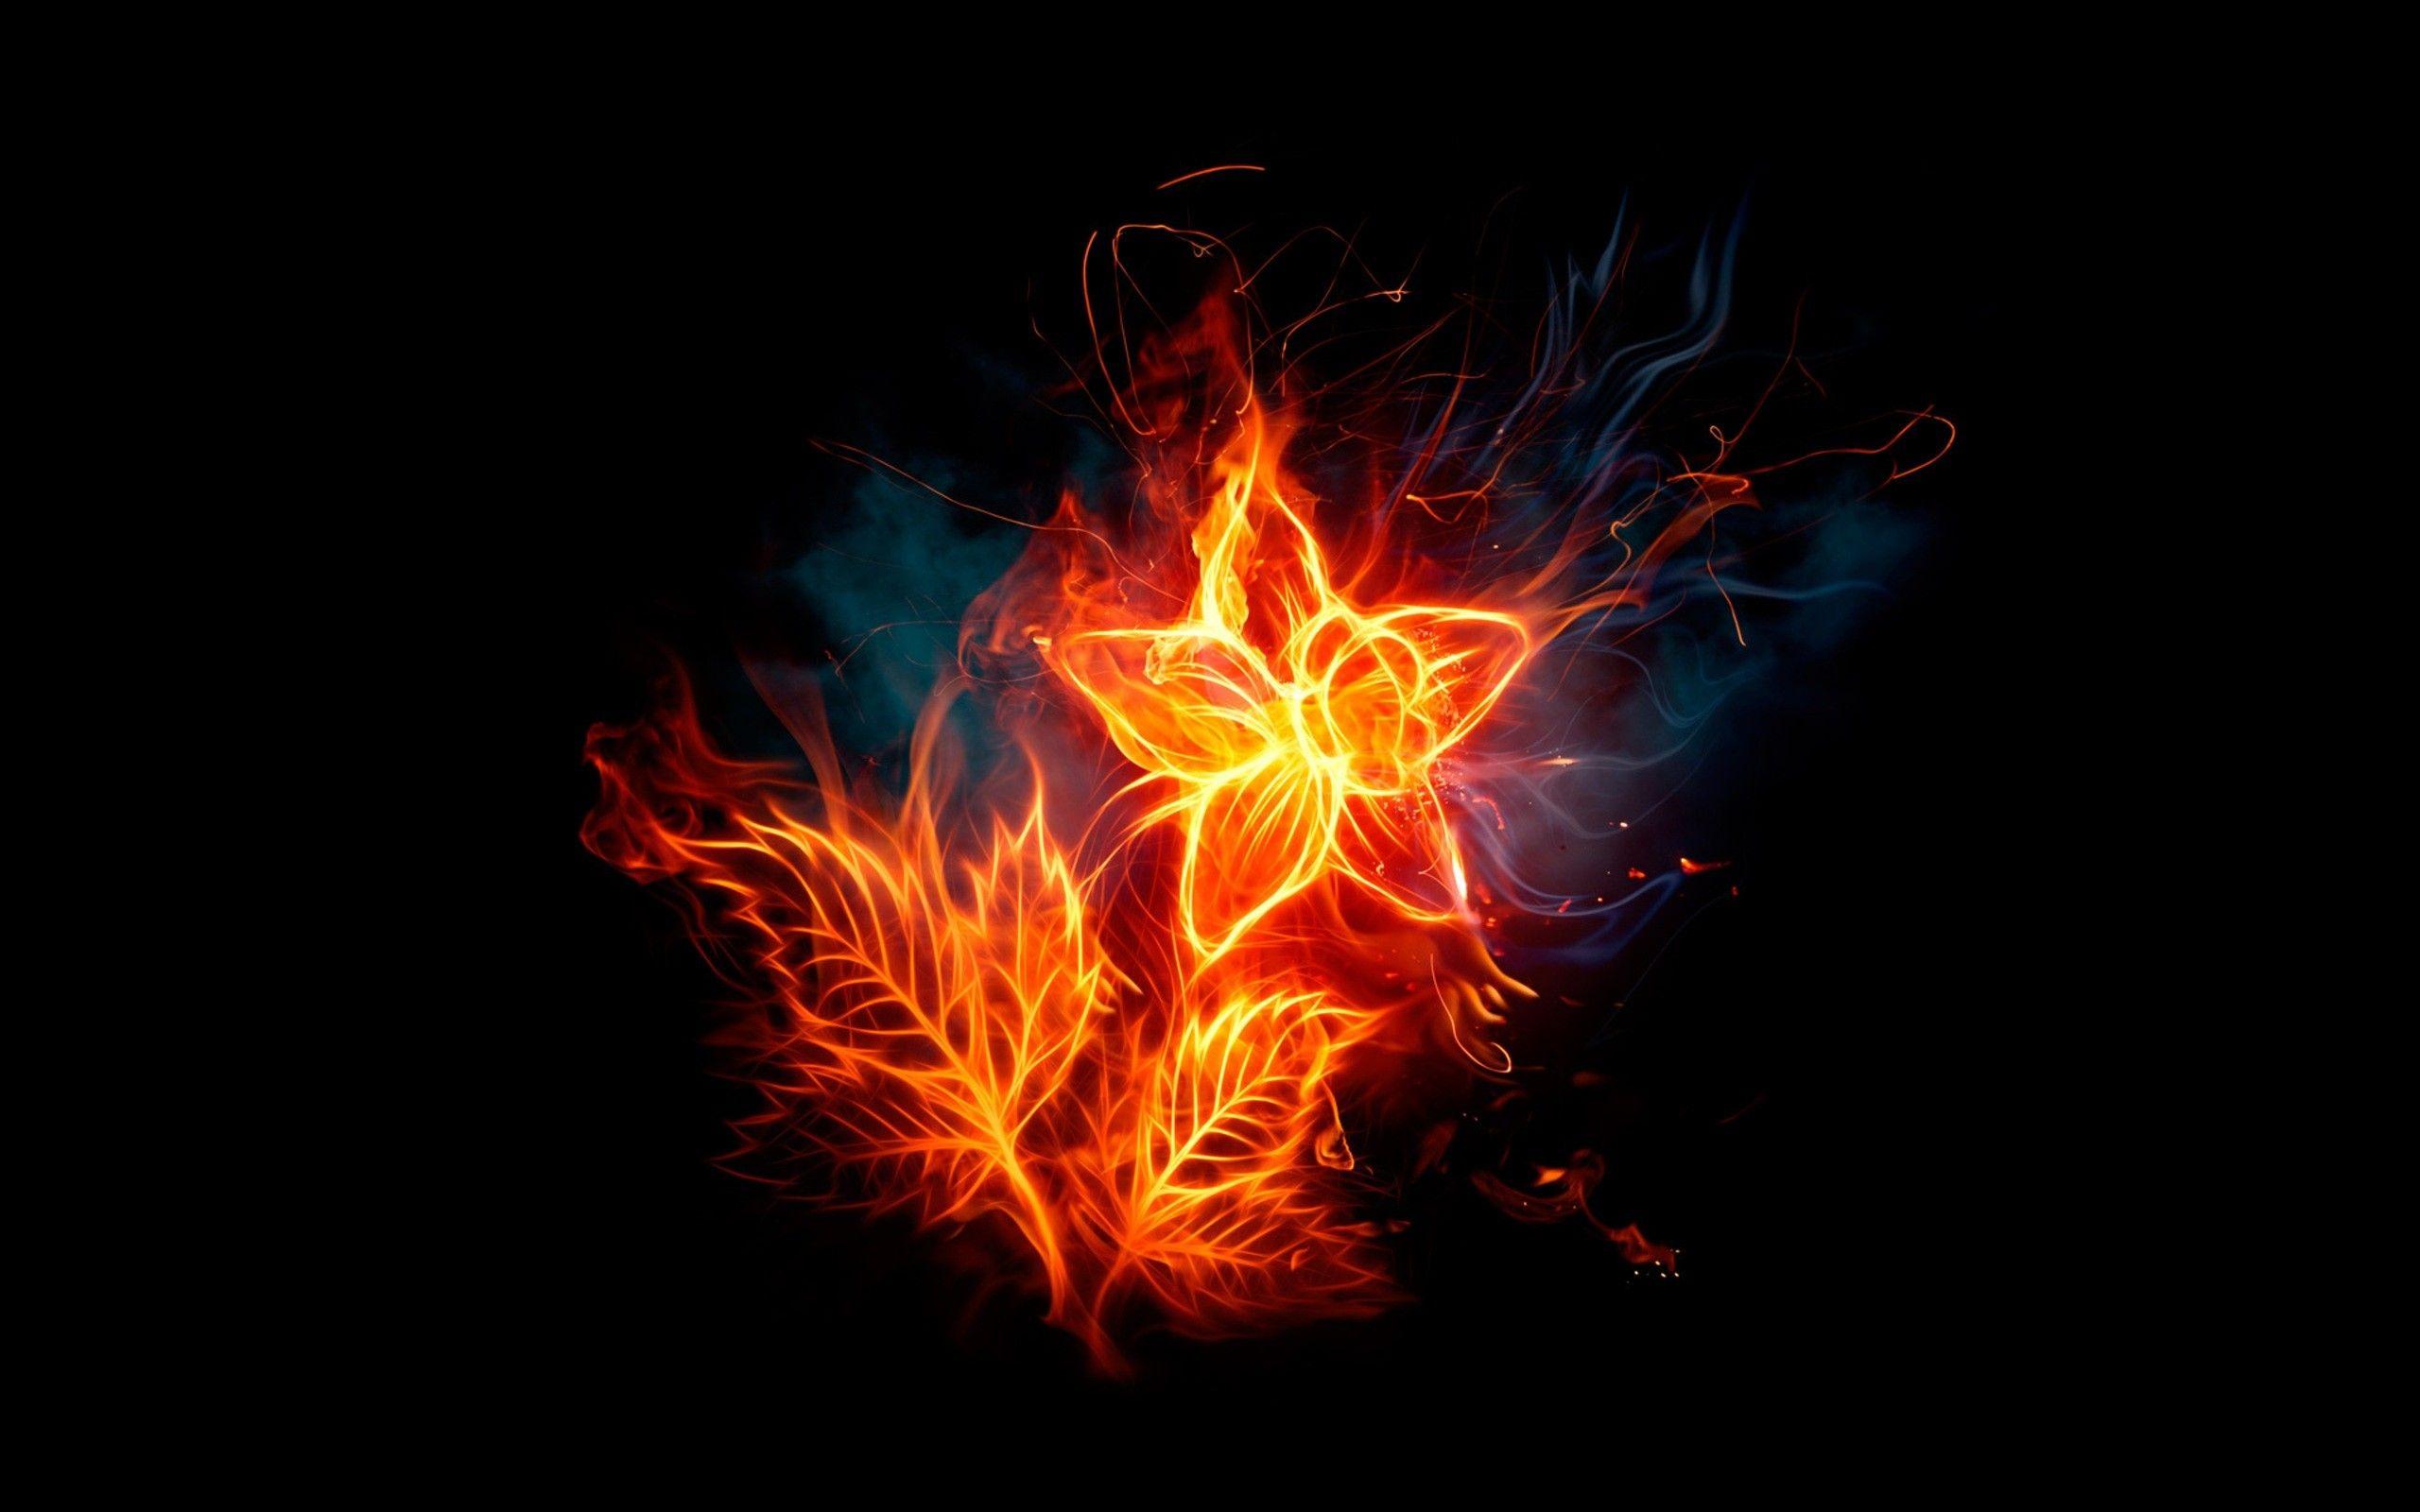 Abstract Fire Glowing Dark Wallpaper and Free